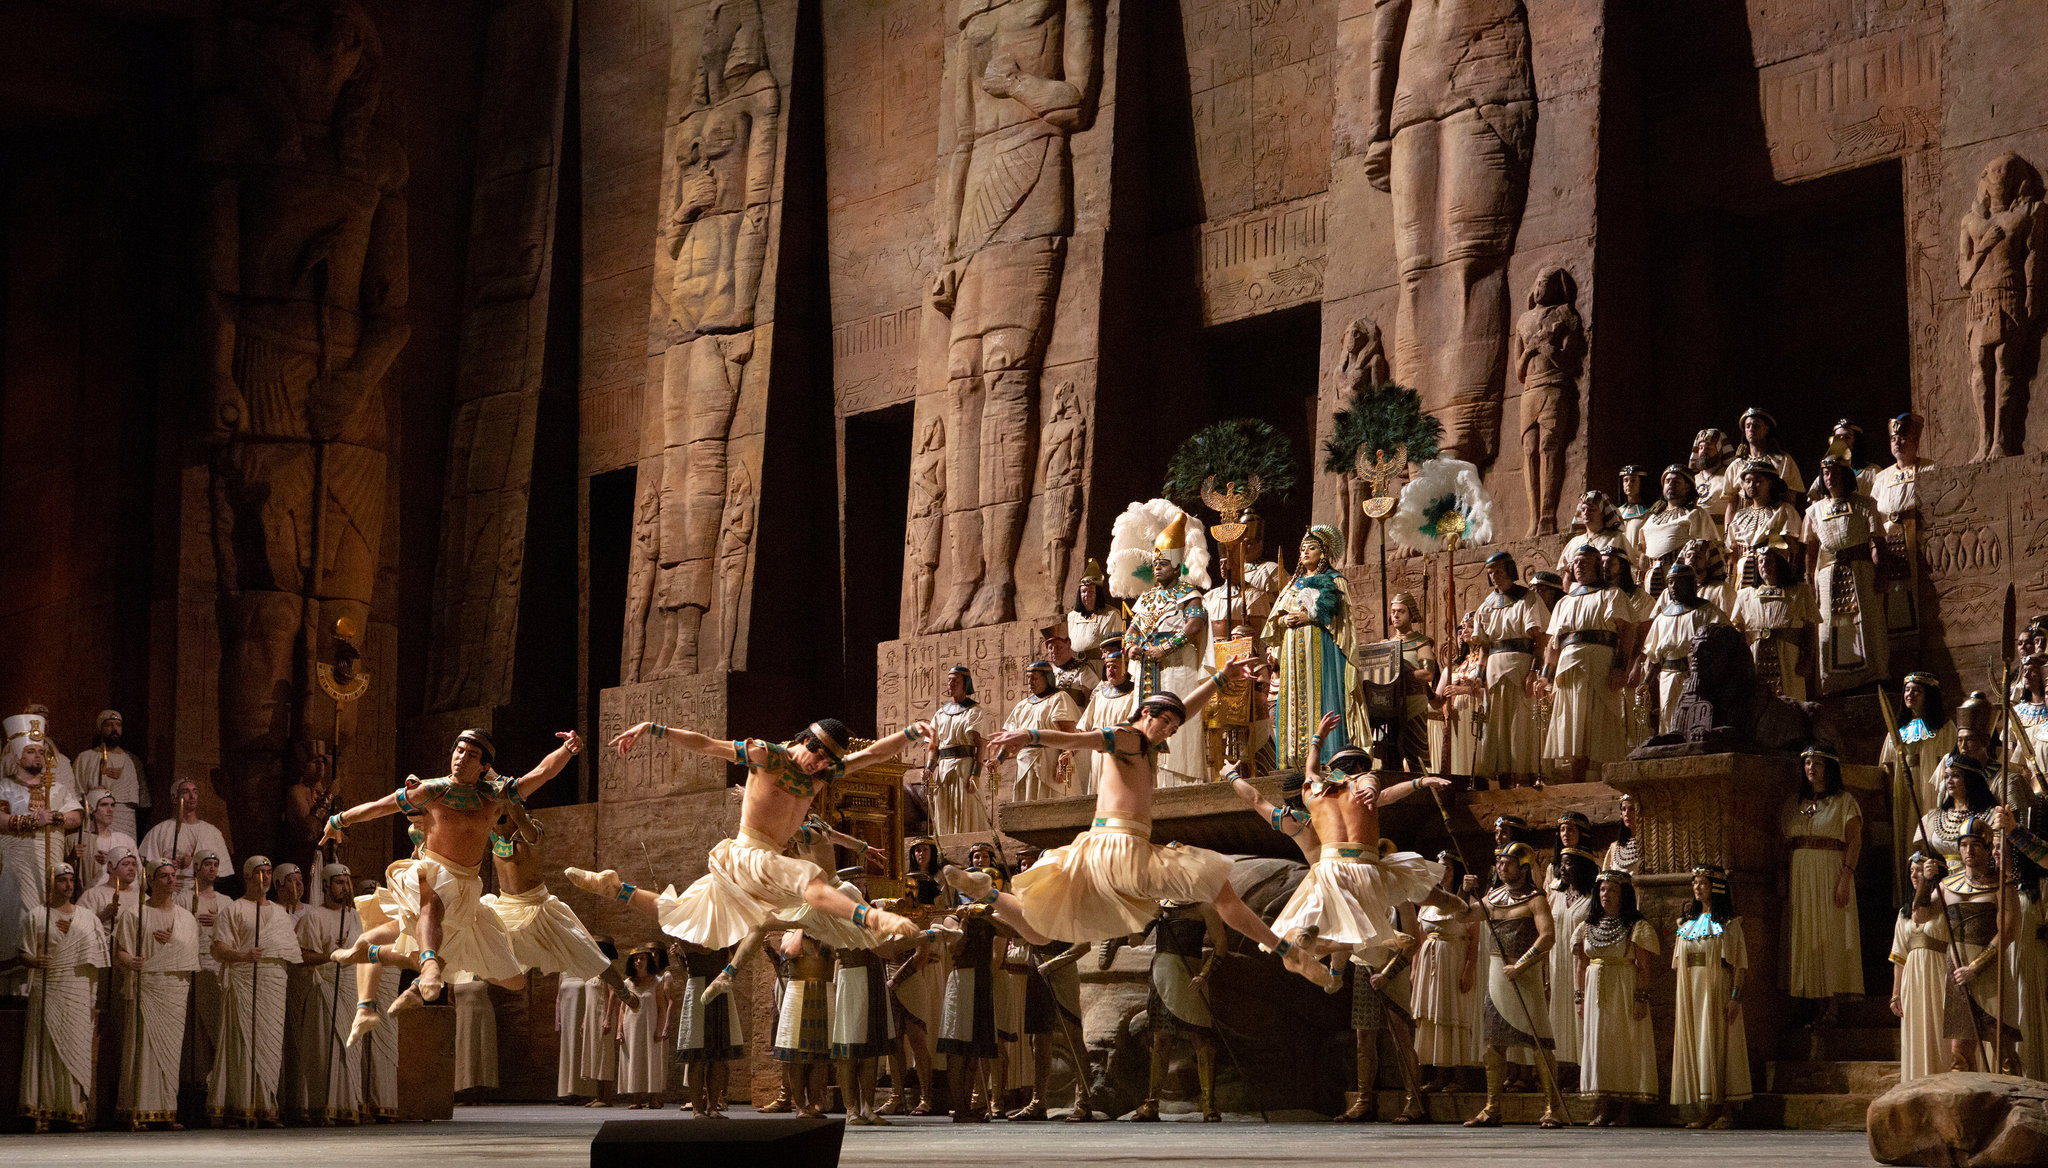 A History of Egypt’s Opera 'Aida': the Captivating and Controvers...